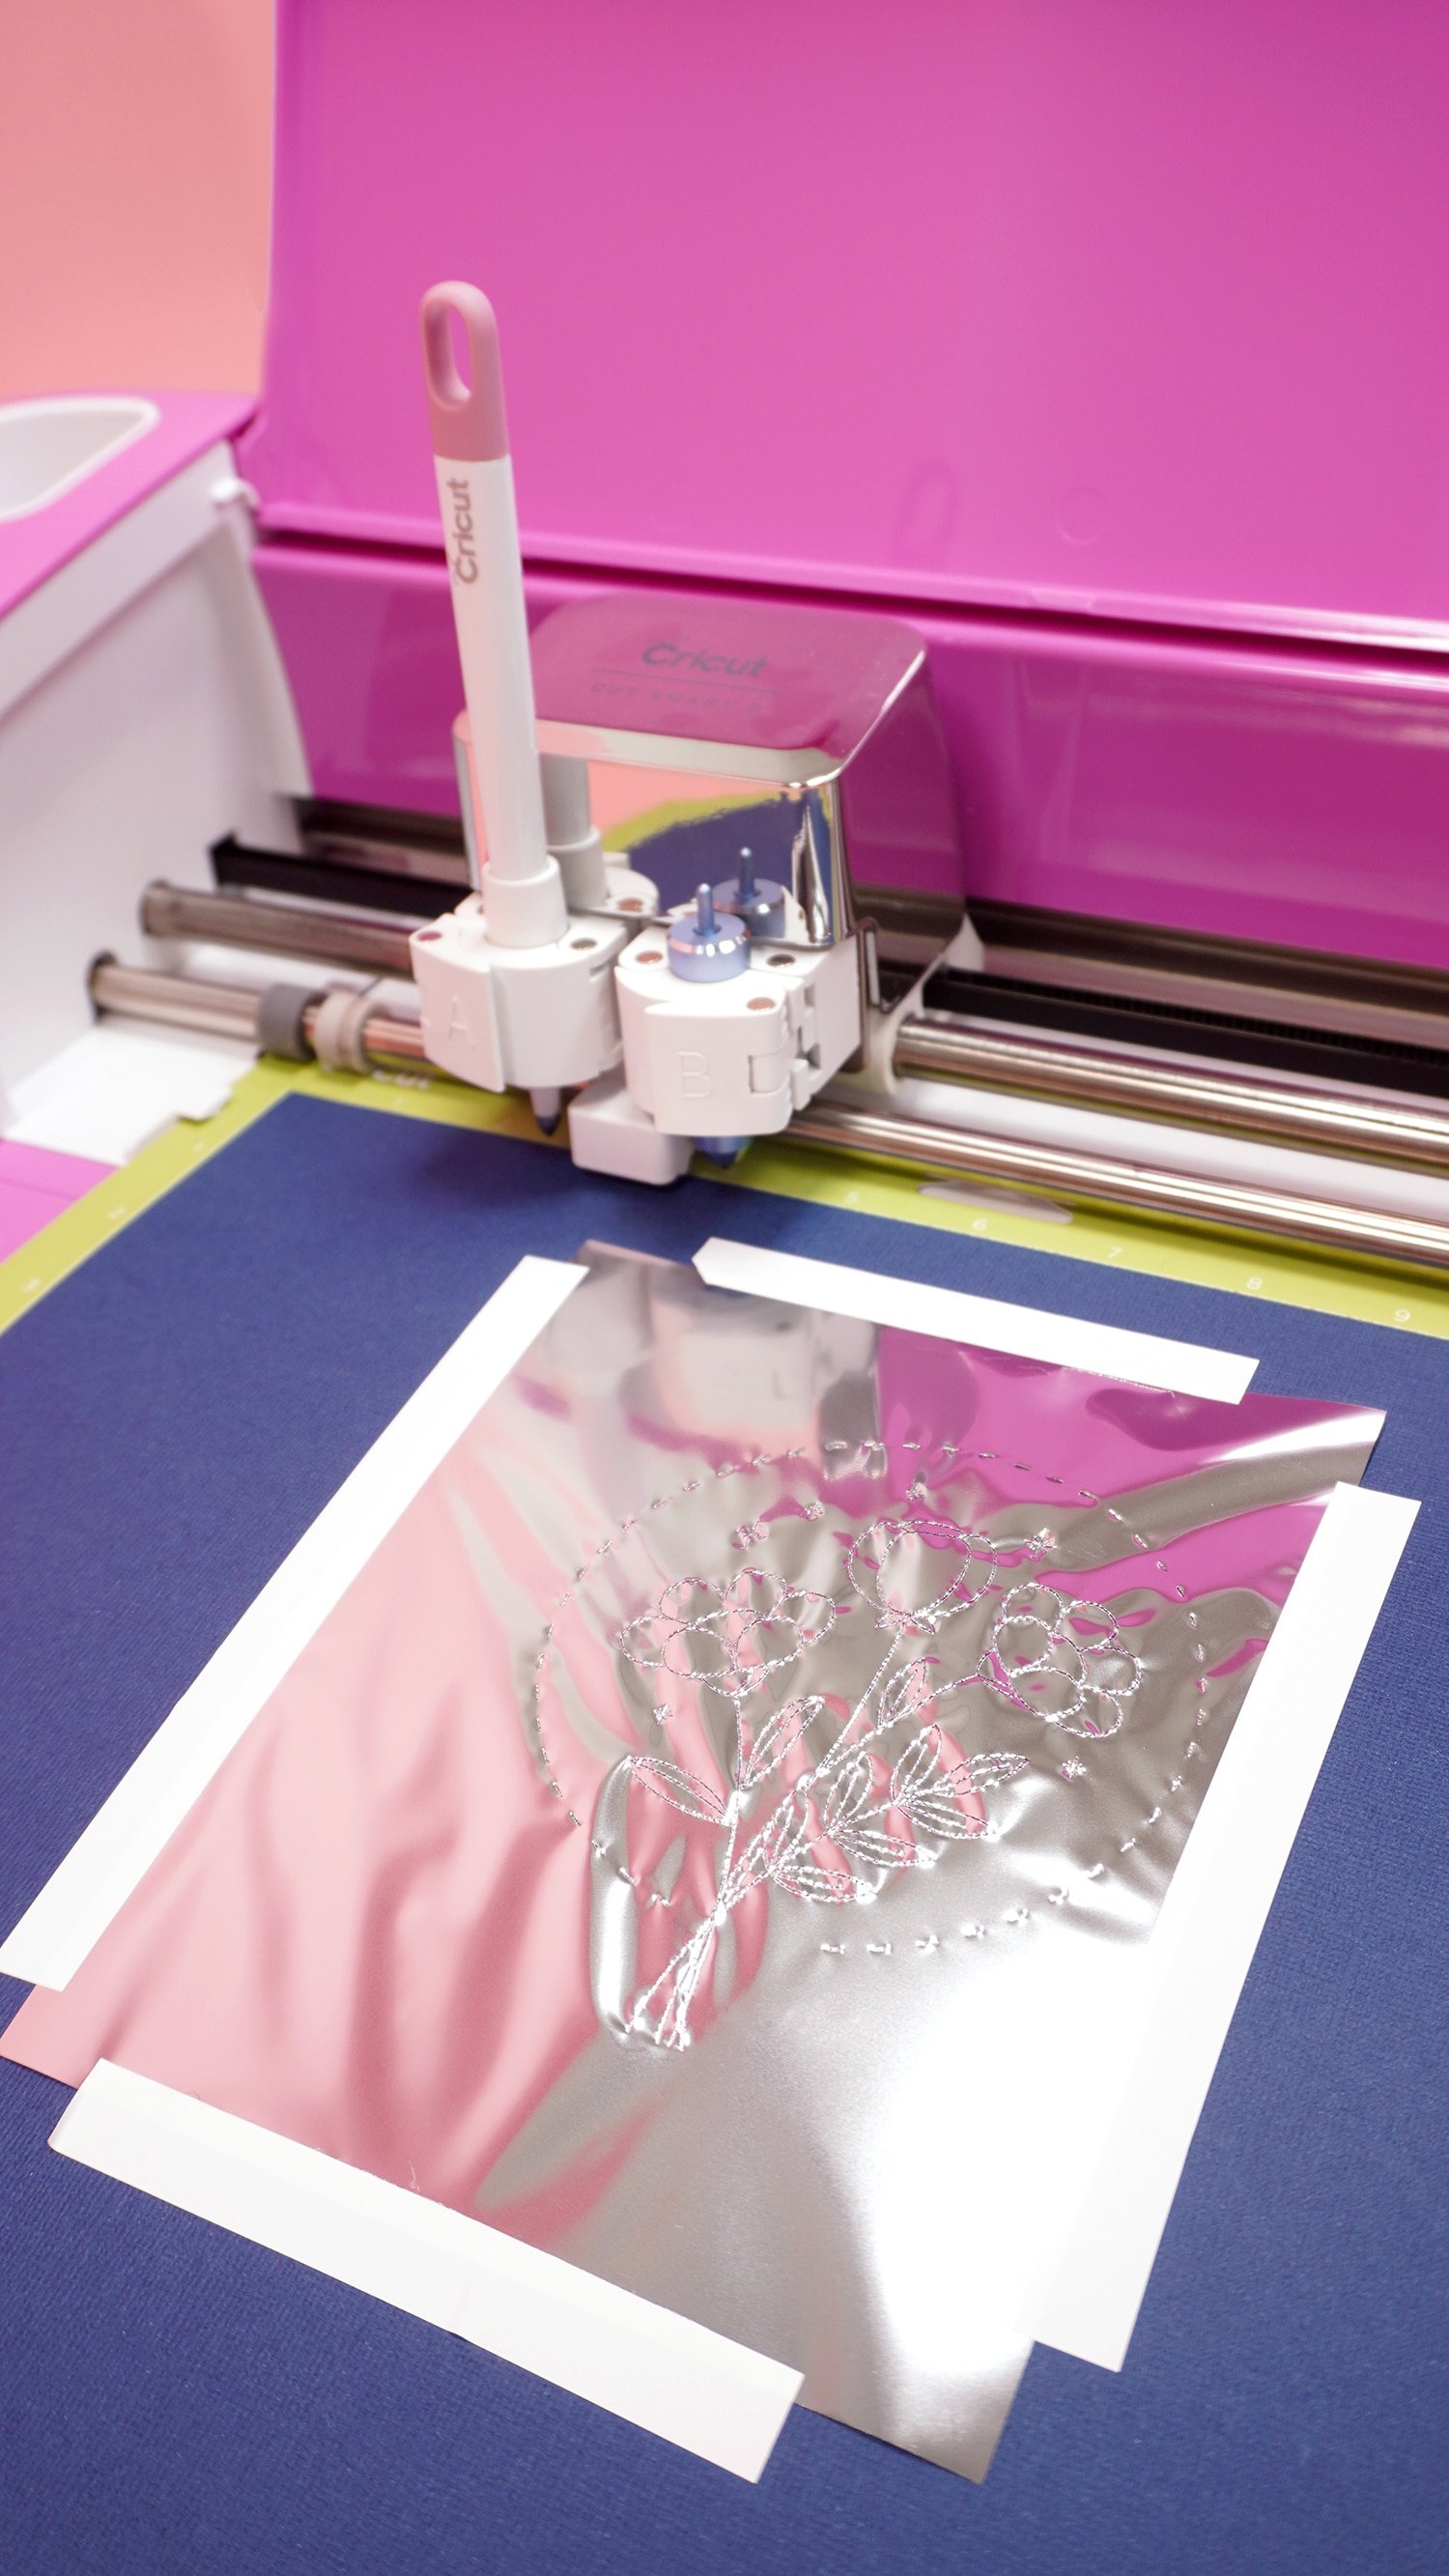 Introducing the New Cricut Foil Transfer System: First Impressions